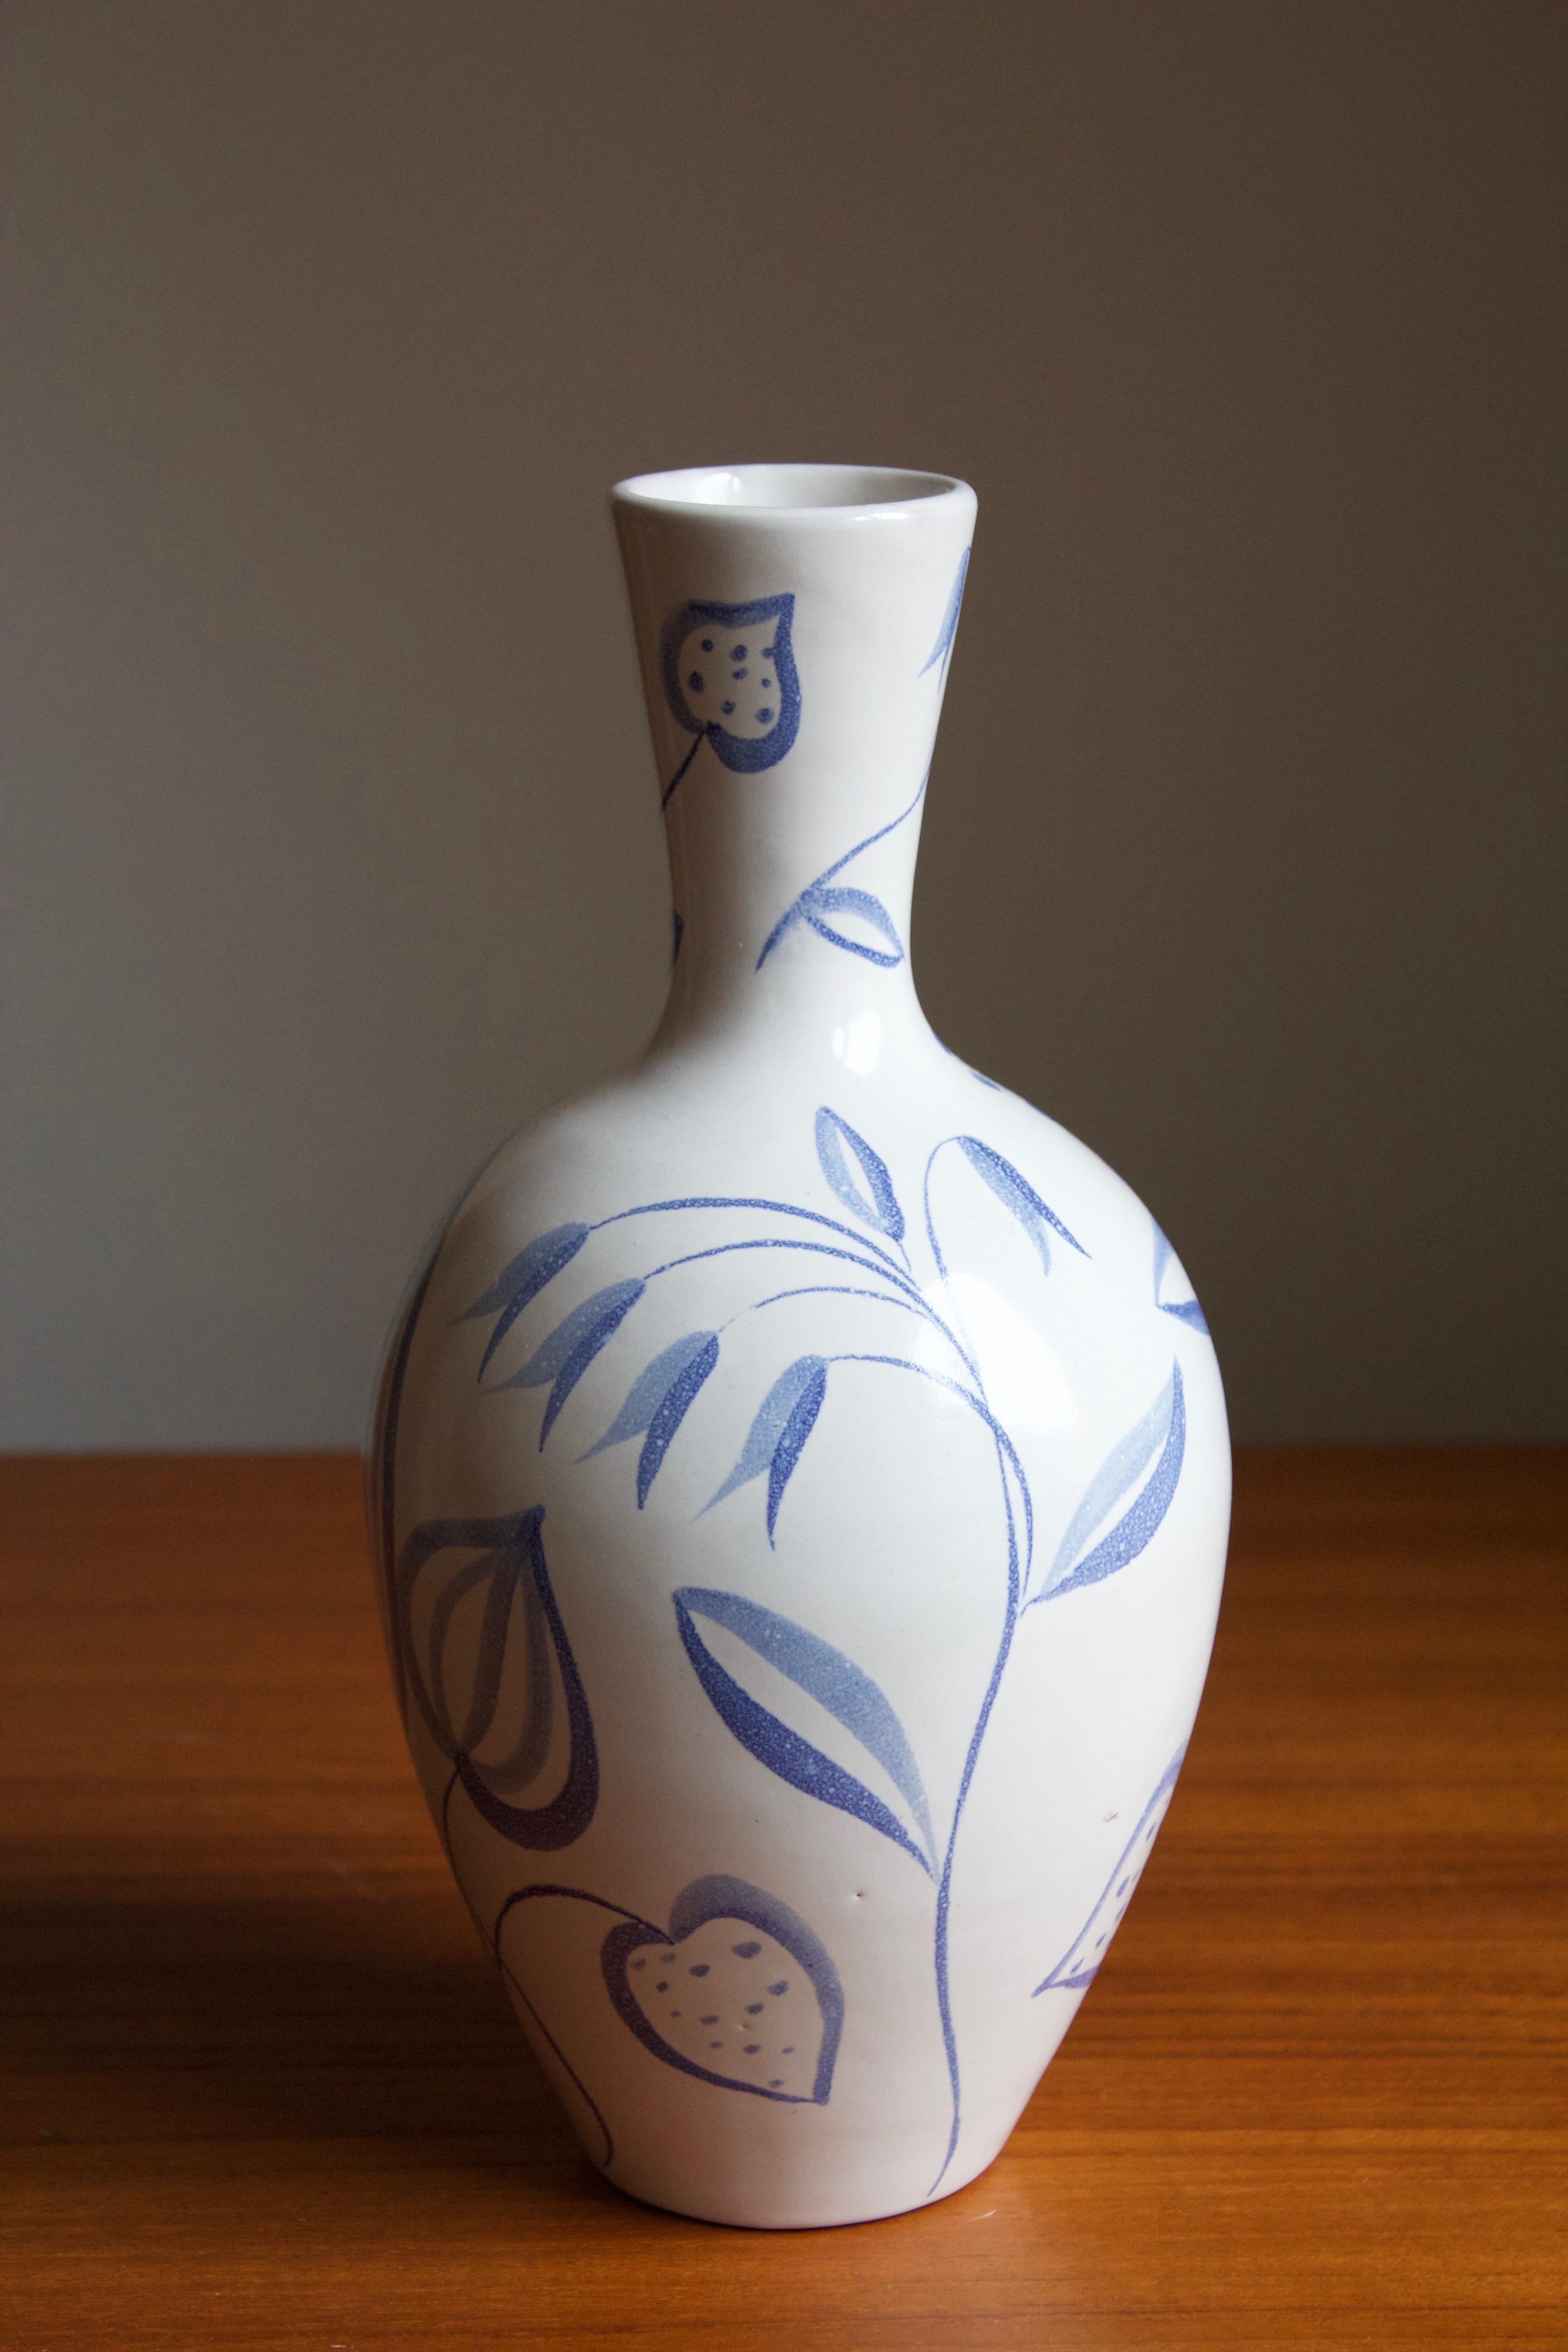 An early modernist vase model Flora. Designed by Anna-Lisa Thomson, for Upsala-Ekeby, Sweden. With stamp including artist's initials. Only produced in 1949.

Other designers of the period include Ettore Sottsass, Carl Harry Stålhane, Lisa Larsson,